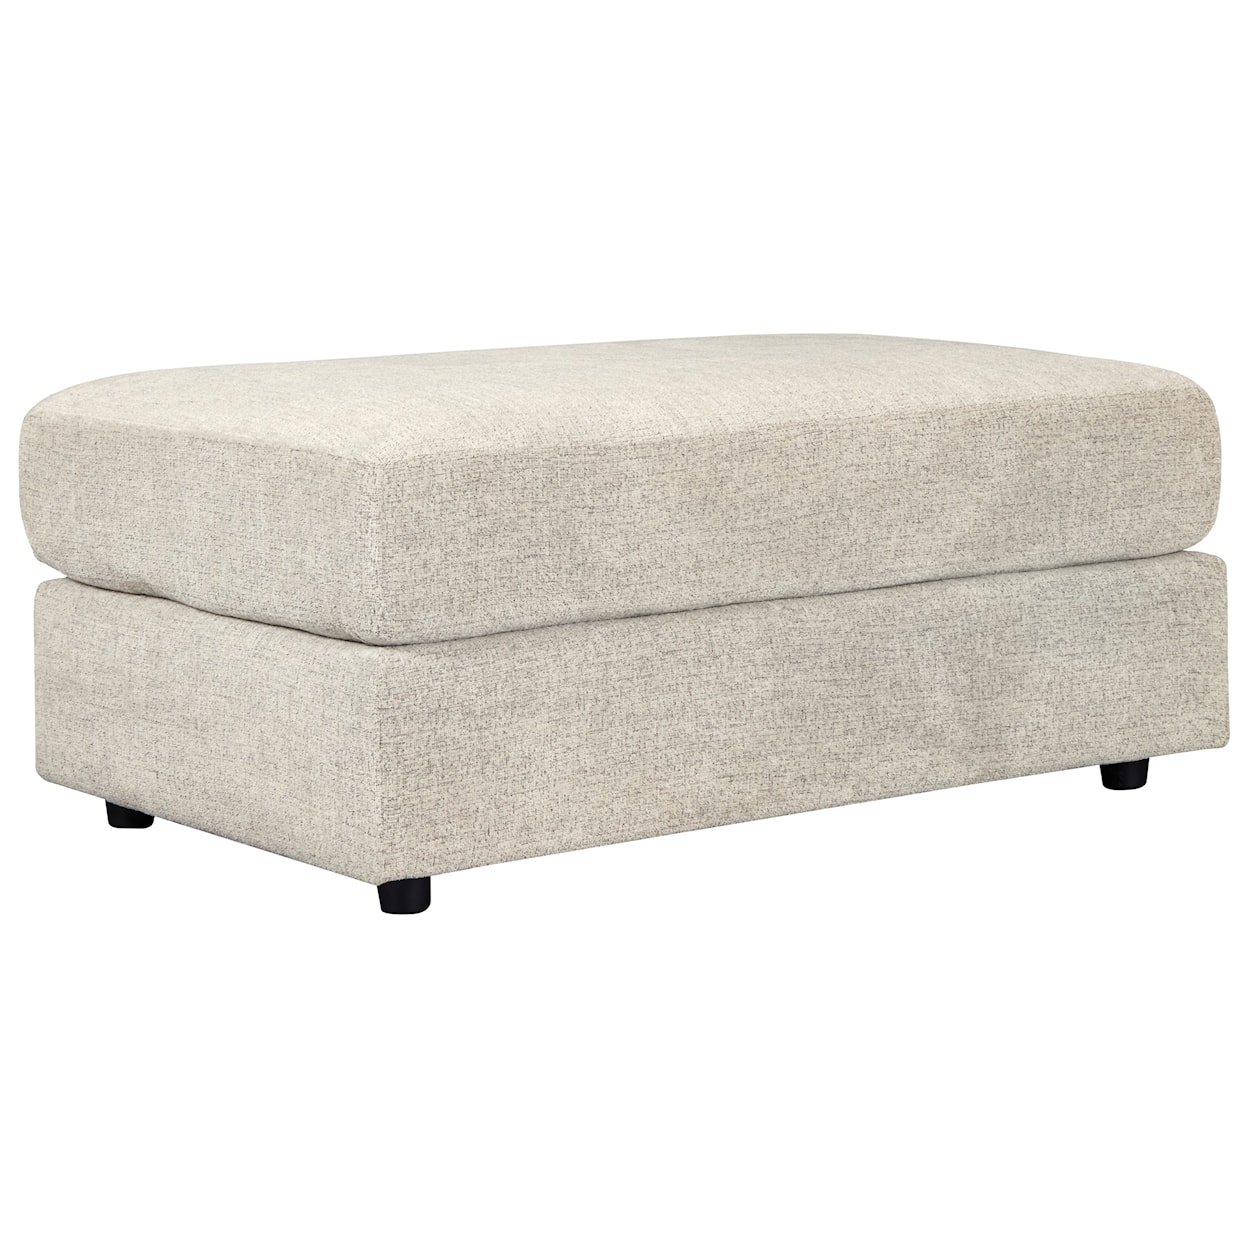 Signature Design by Ashley Soletren Oversized Accent Ottoman